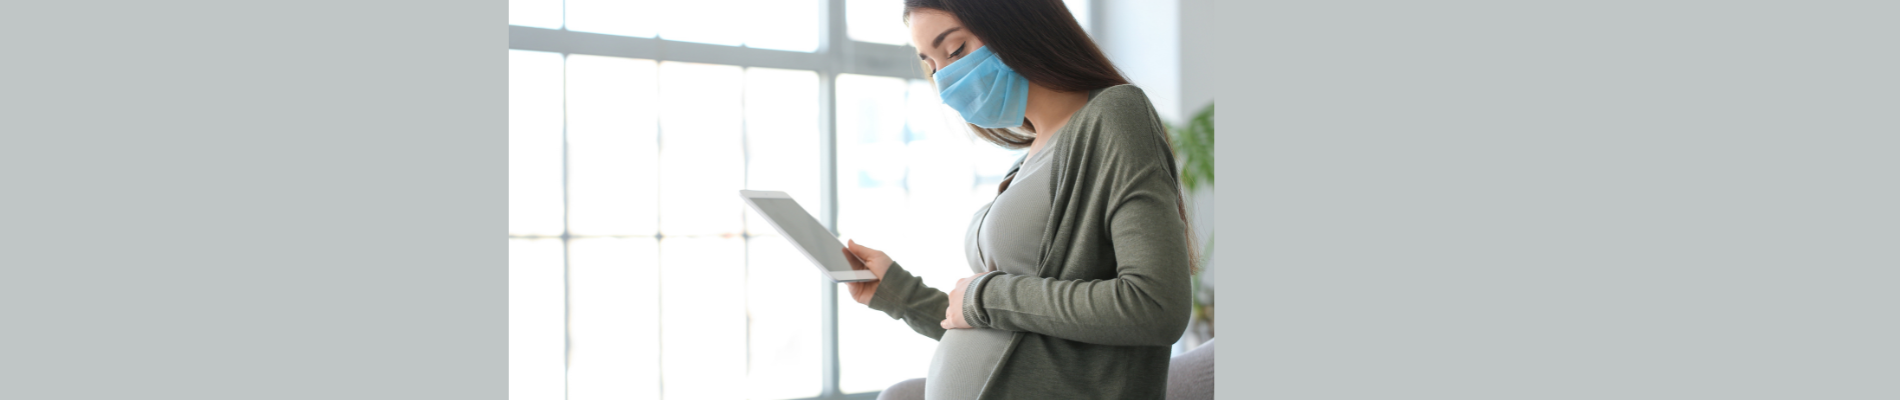 pregnant woman wearing a mask looking at her tablet